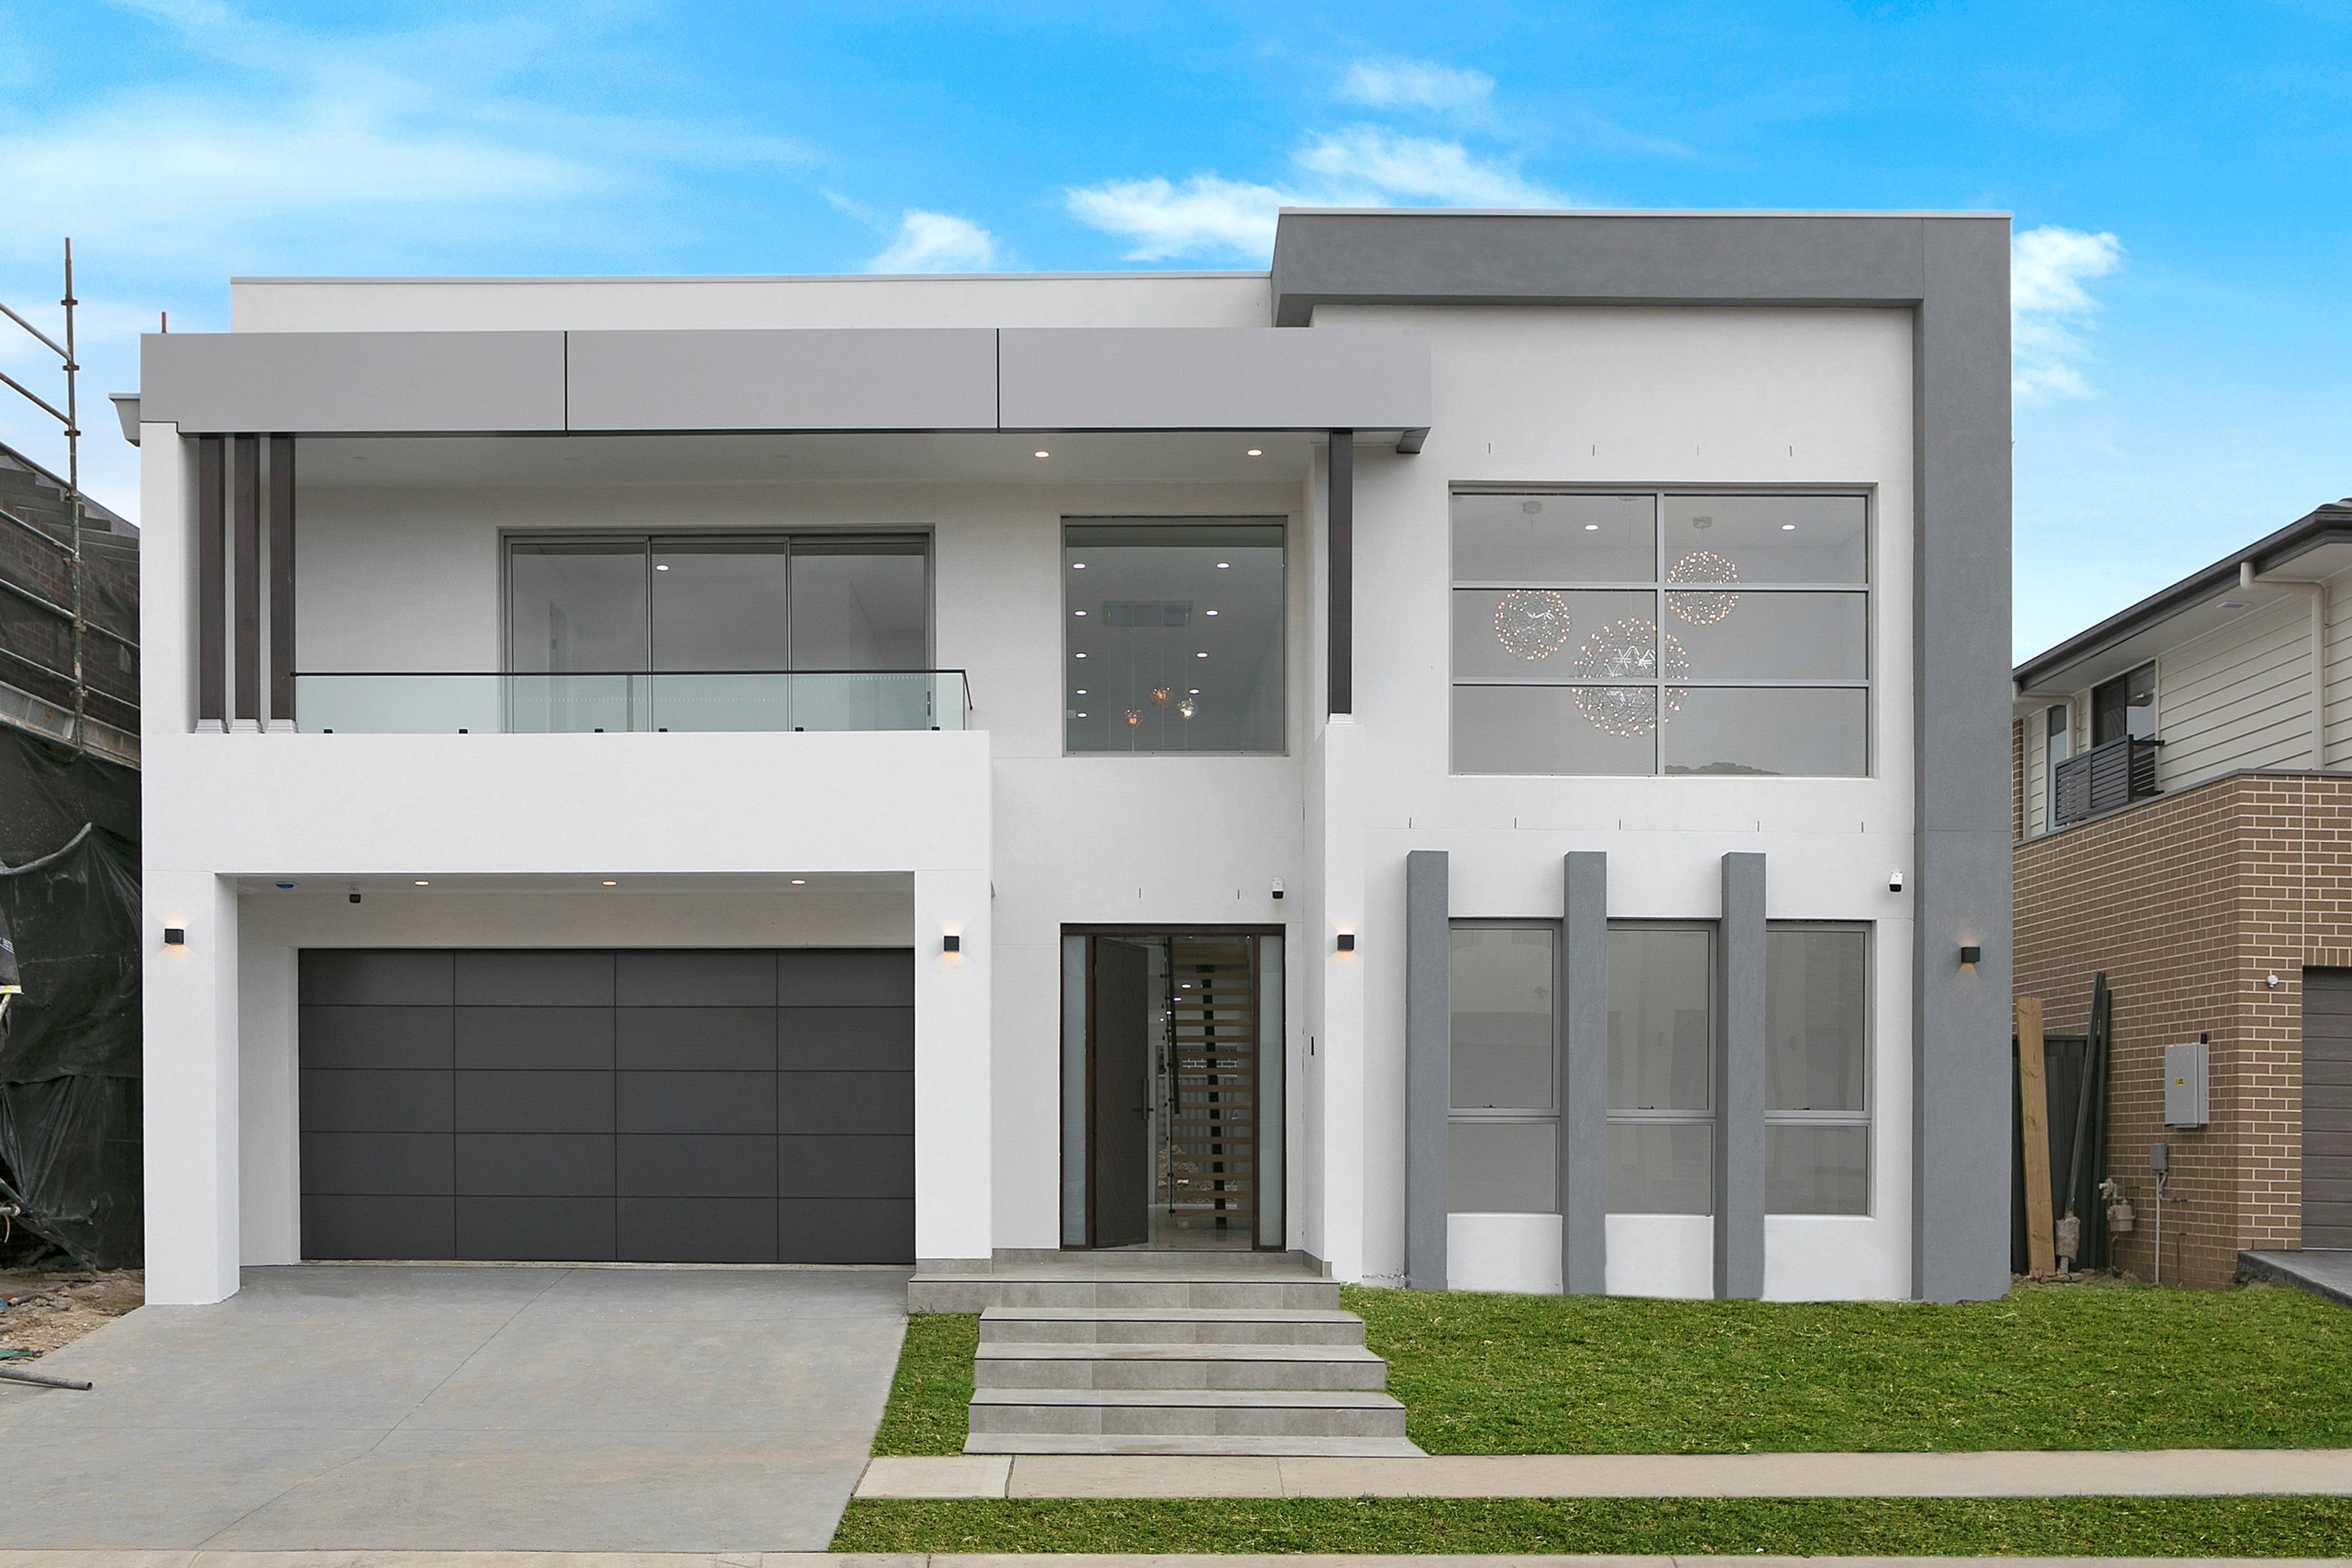 Dezire Homes build, grey and white facade with accent features